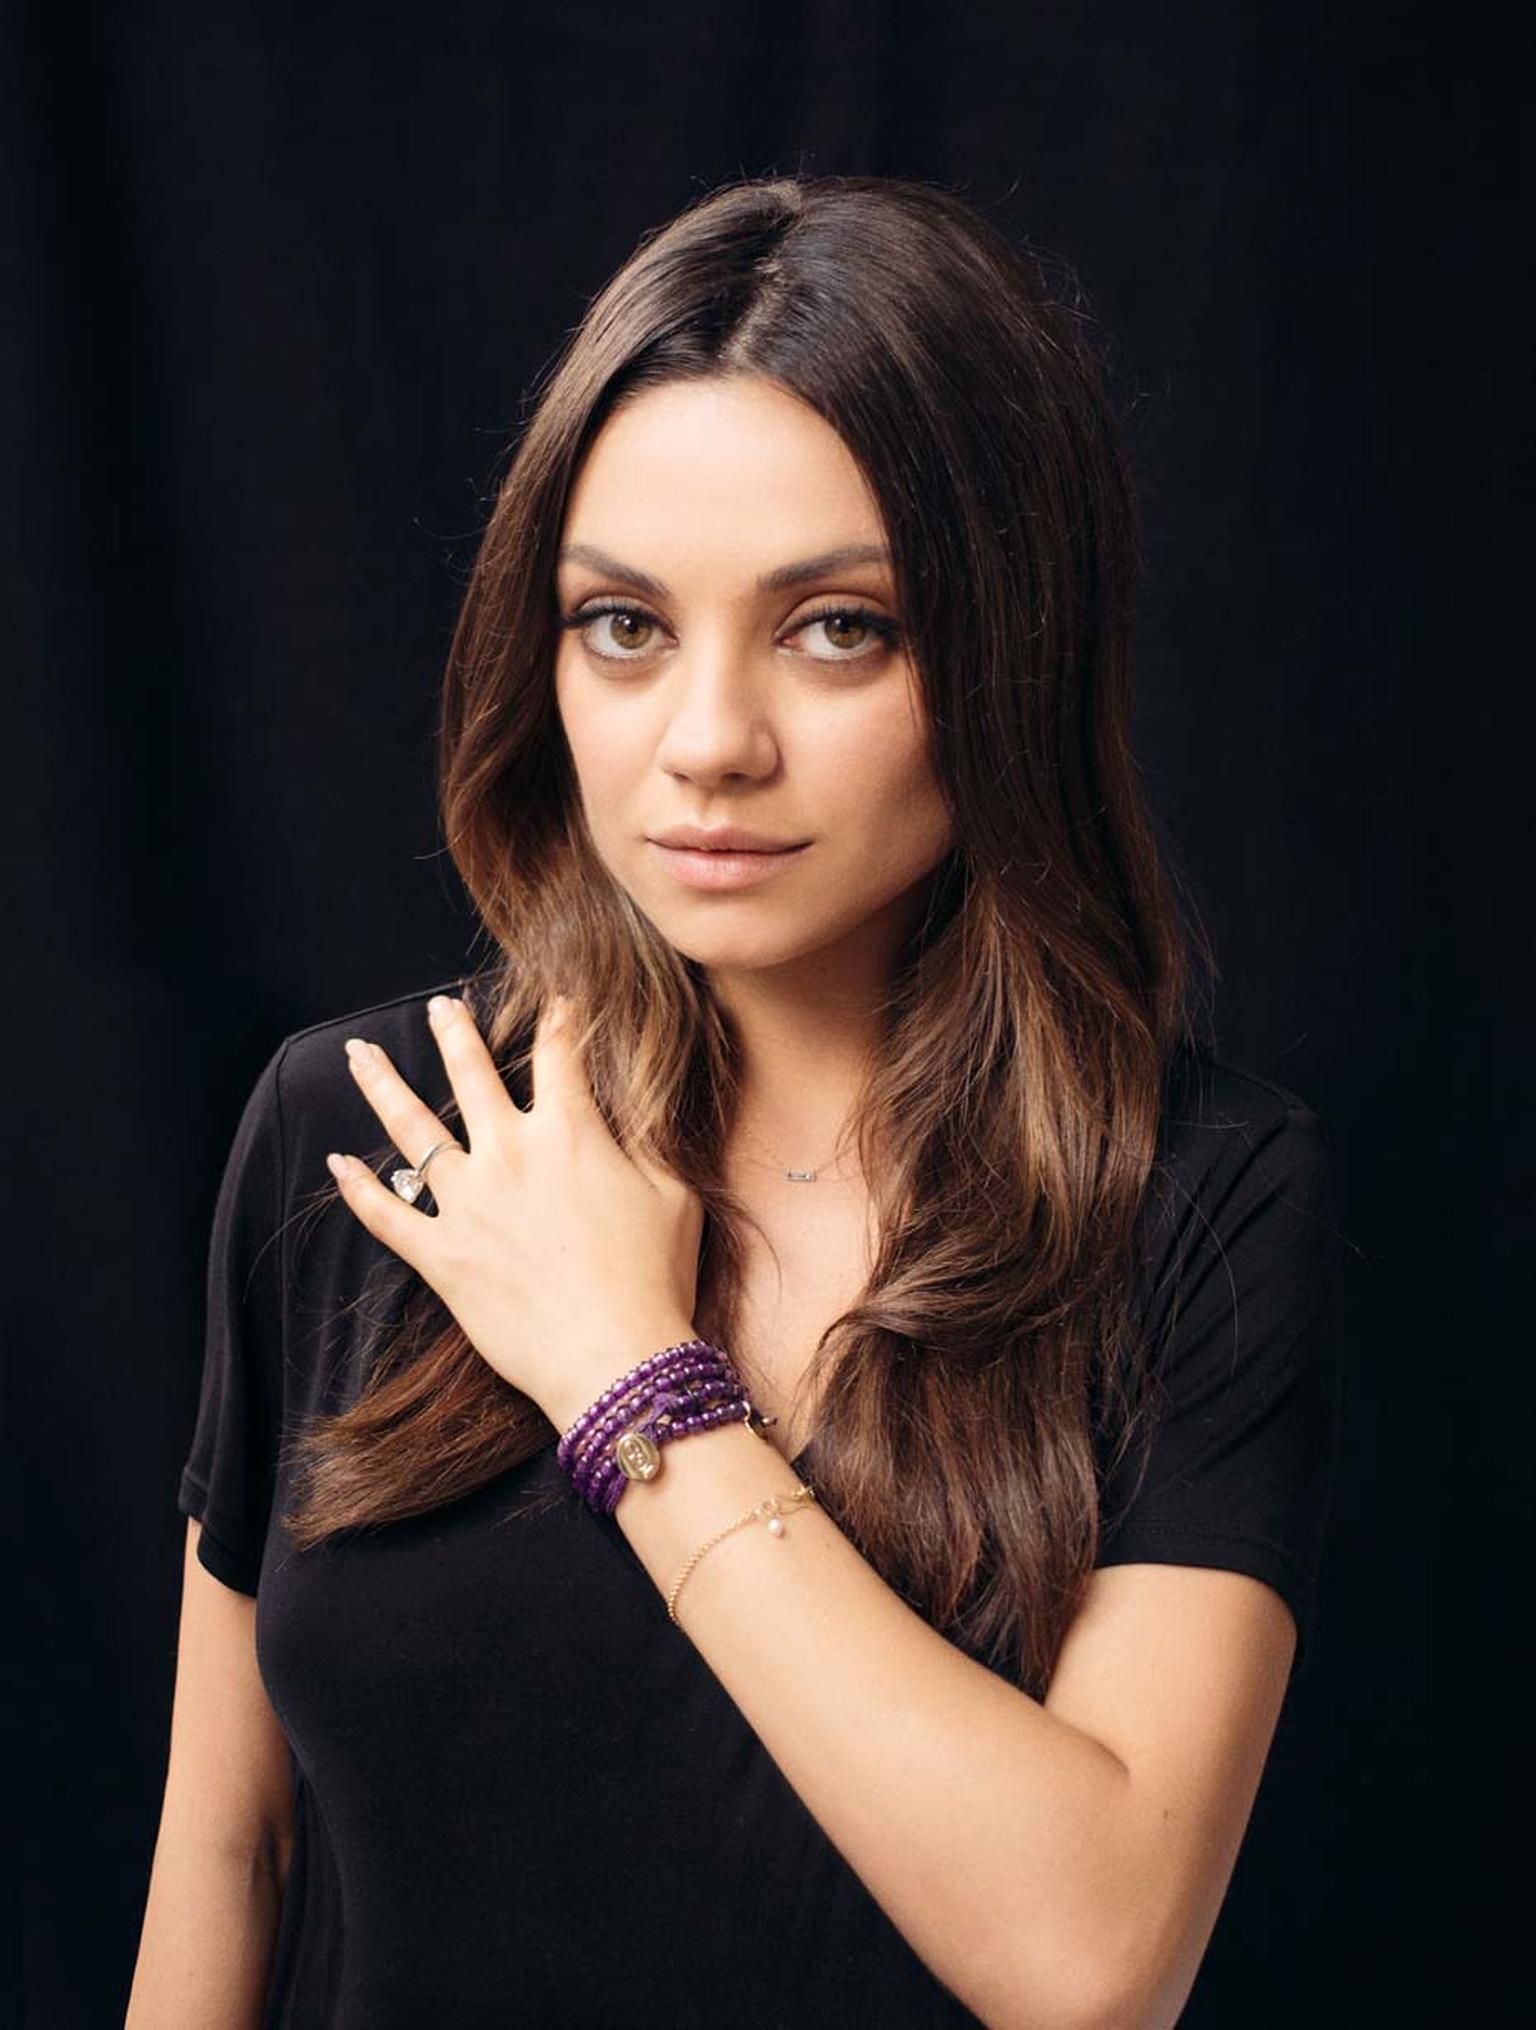 Gemfields and its brand ambassador, Mila Kunis, have teamed up with activist designer, Mary Fisher, to create the Gemfields 100 Good Deeds amethyst bracelet, a very special piece of jewelry that will help vulnerable women and children around the world.